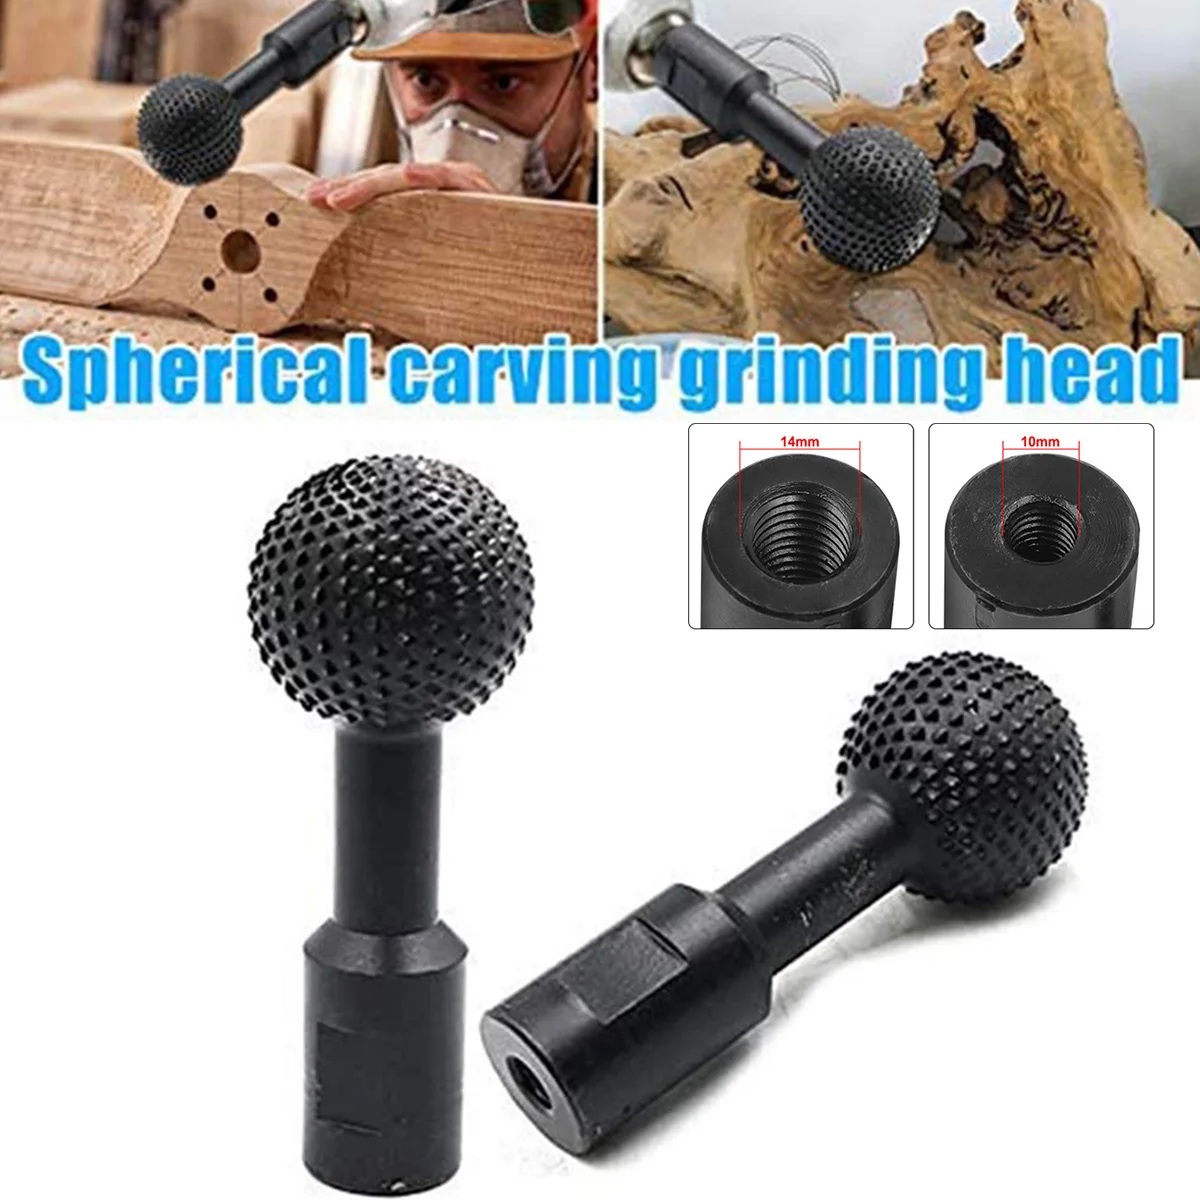 

Spherical Wooden Groove Carving Knife Polishing Head Angle Grinder Ball Gouge Rotary File Woodworking Polishing Milling Cutter